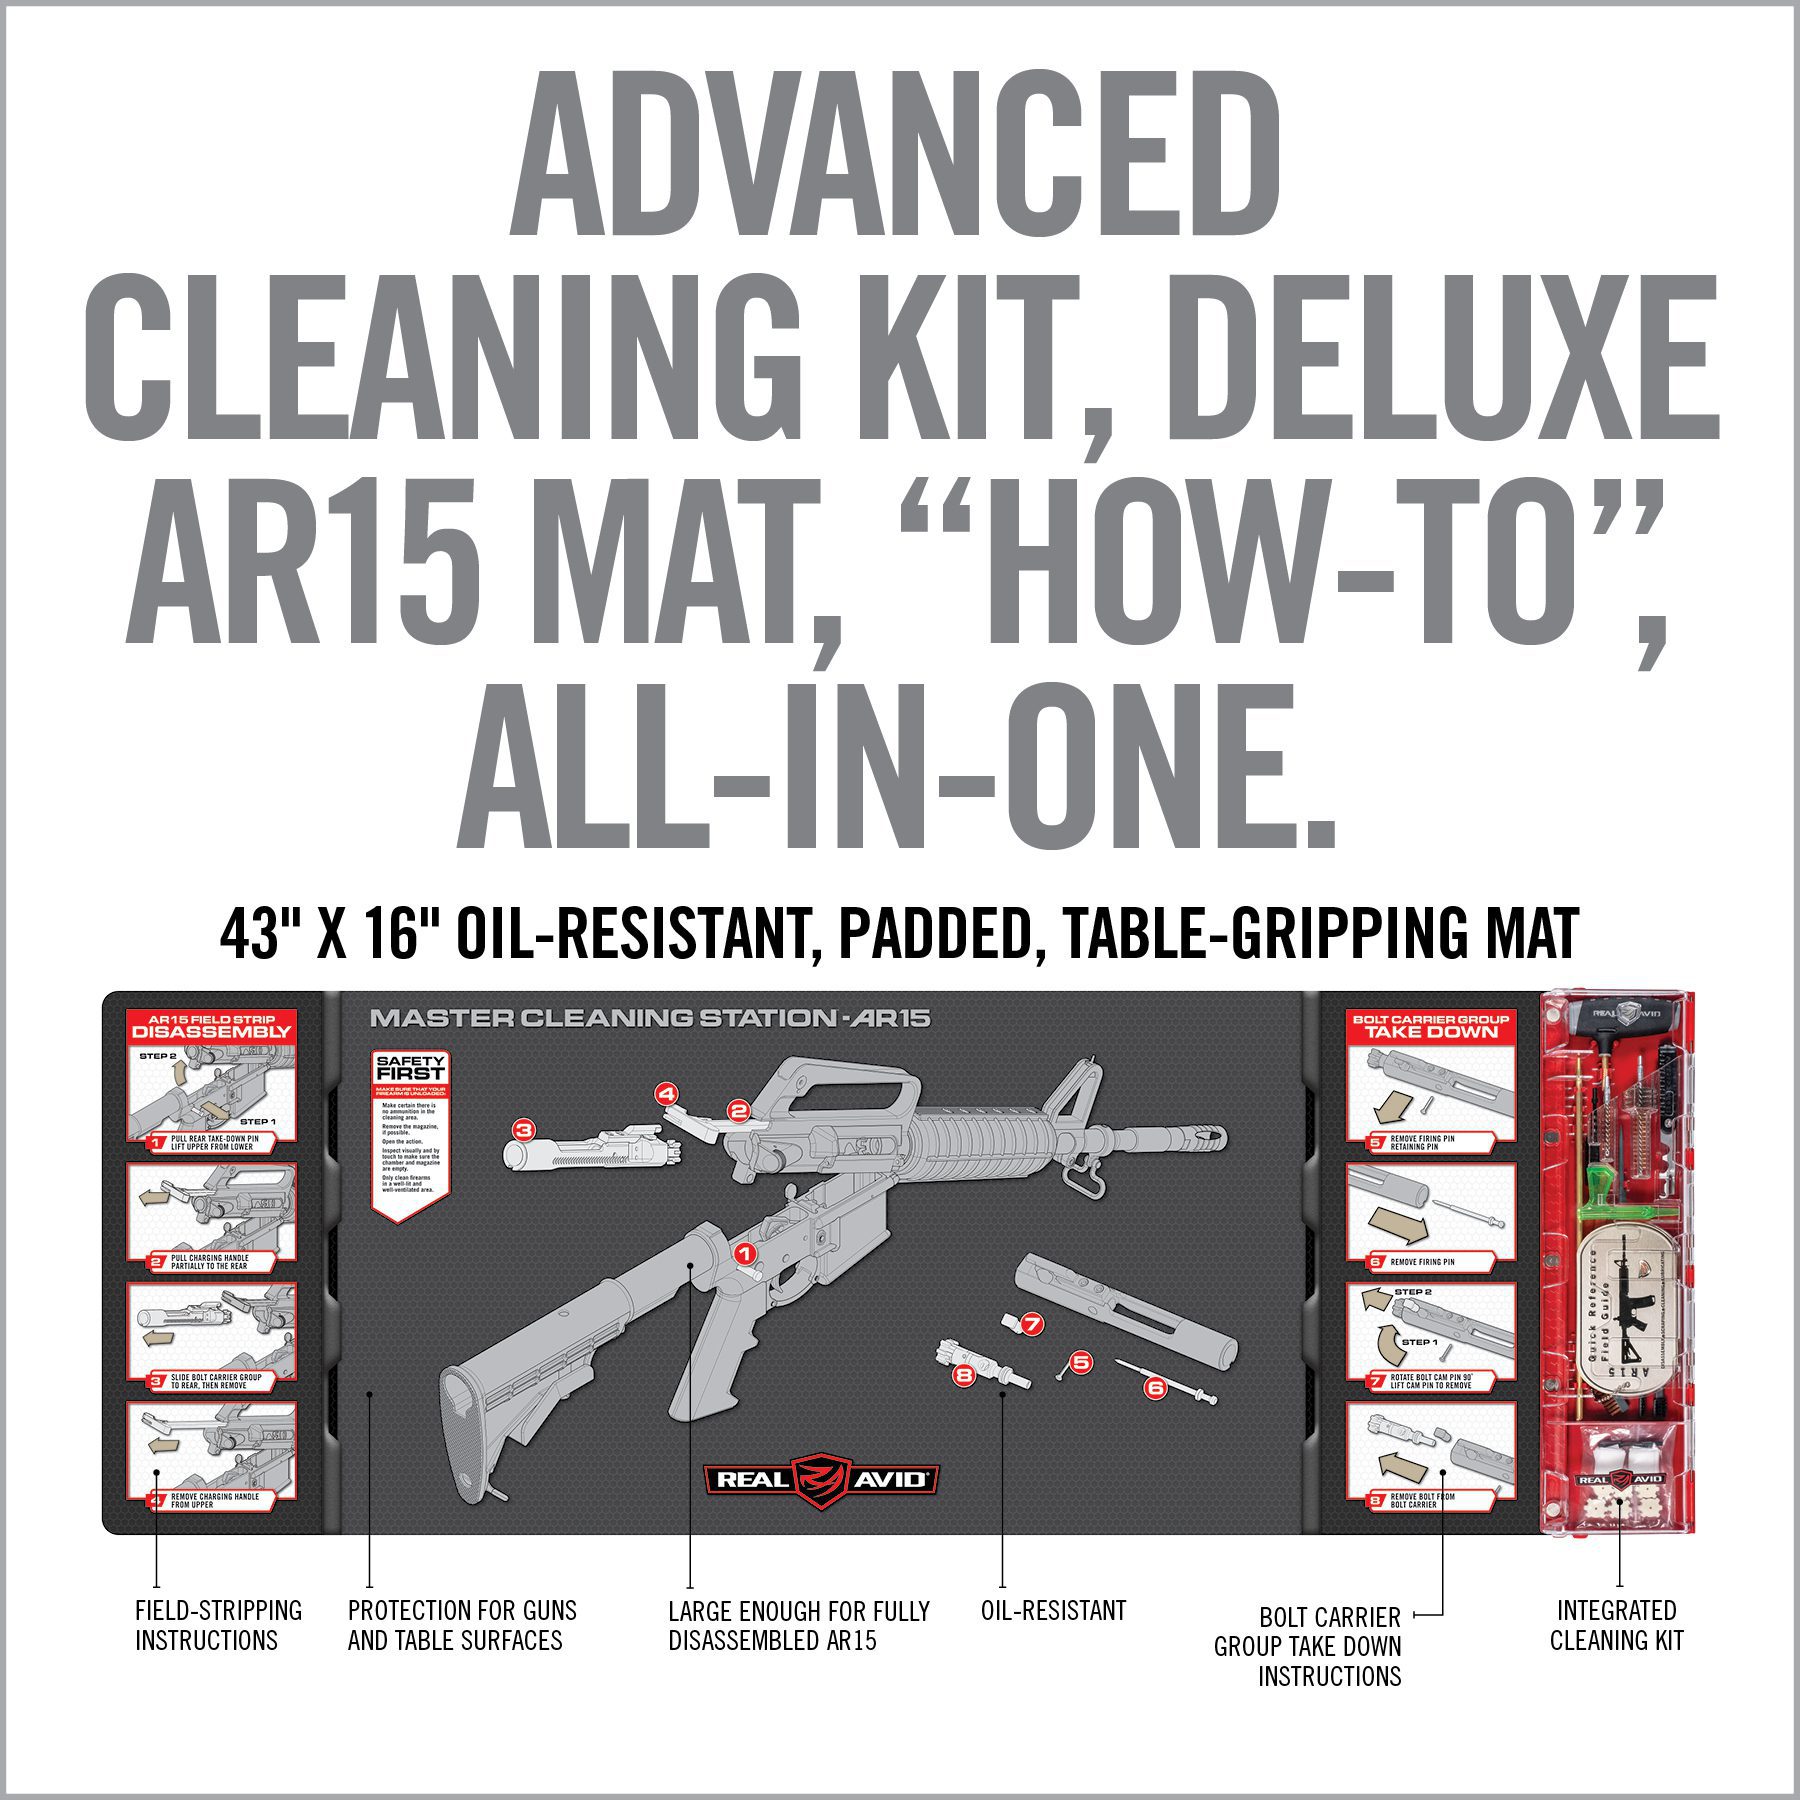 the instructions for how to clean an ar - 15 rifle